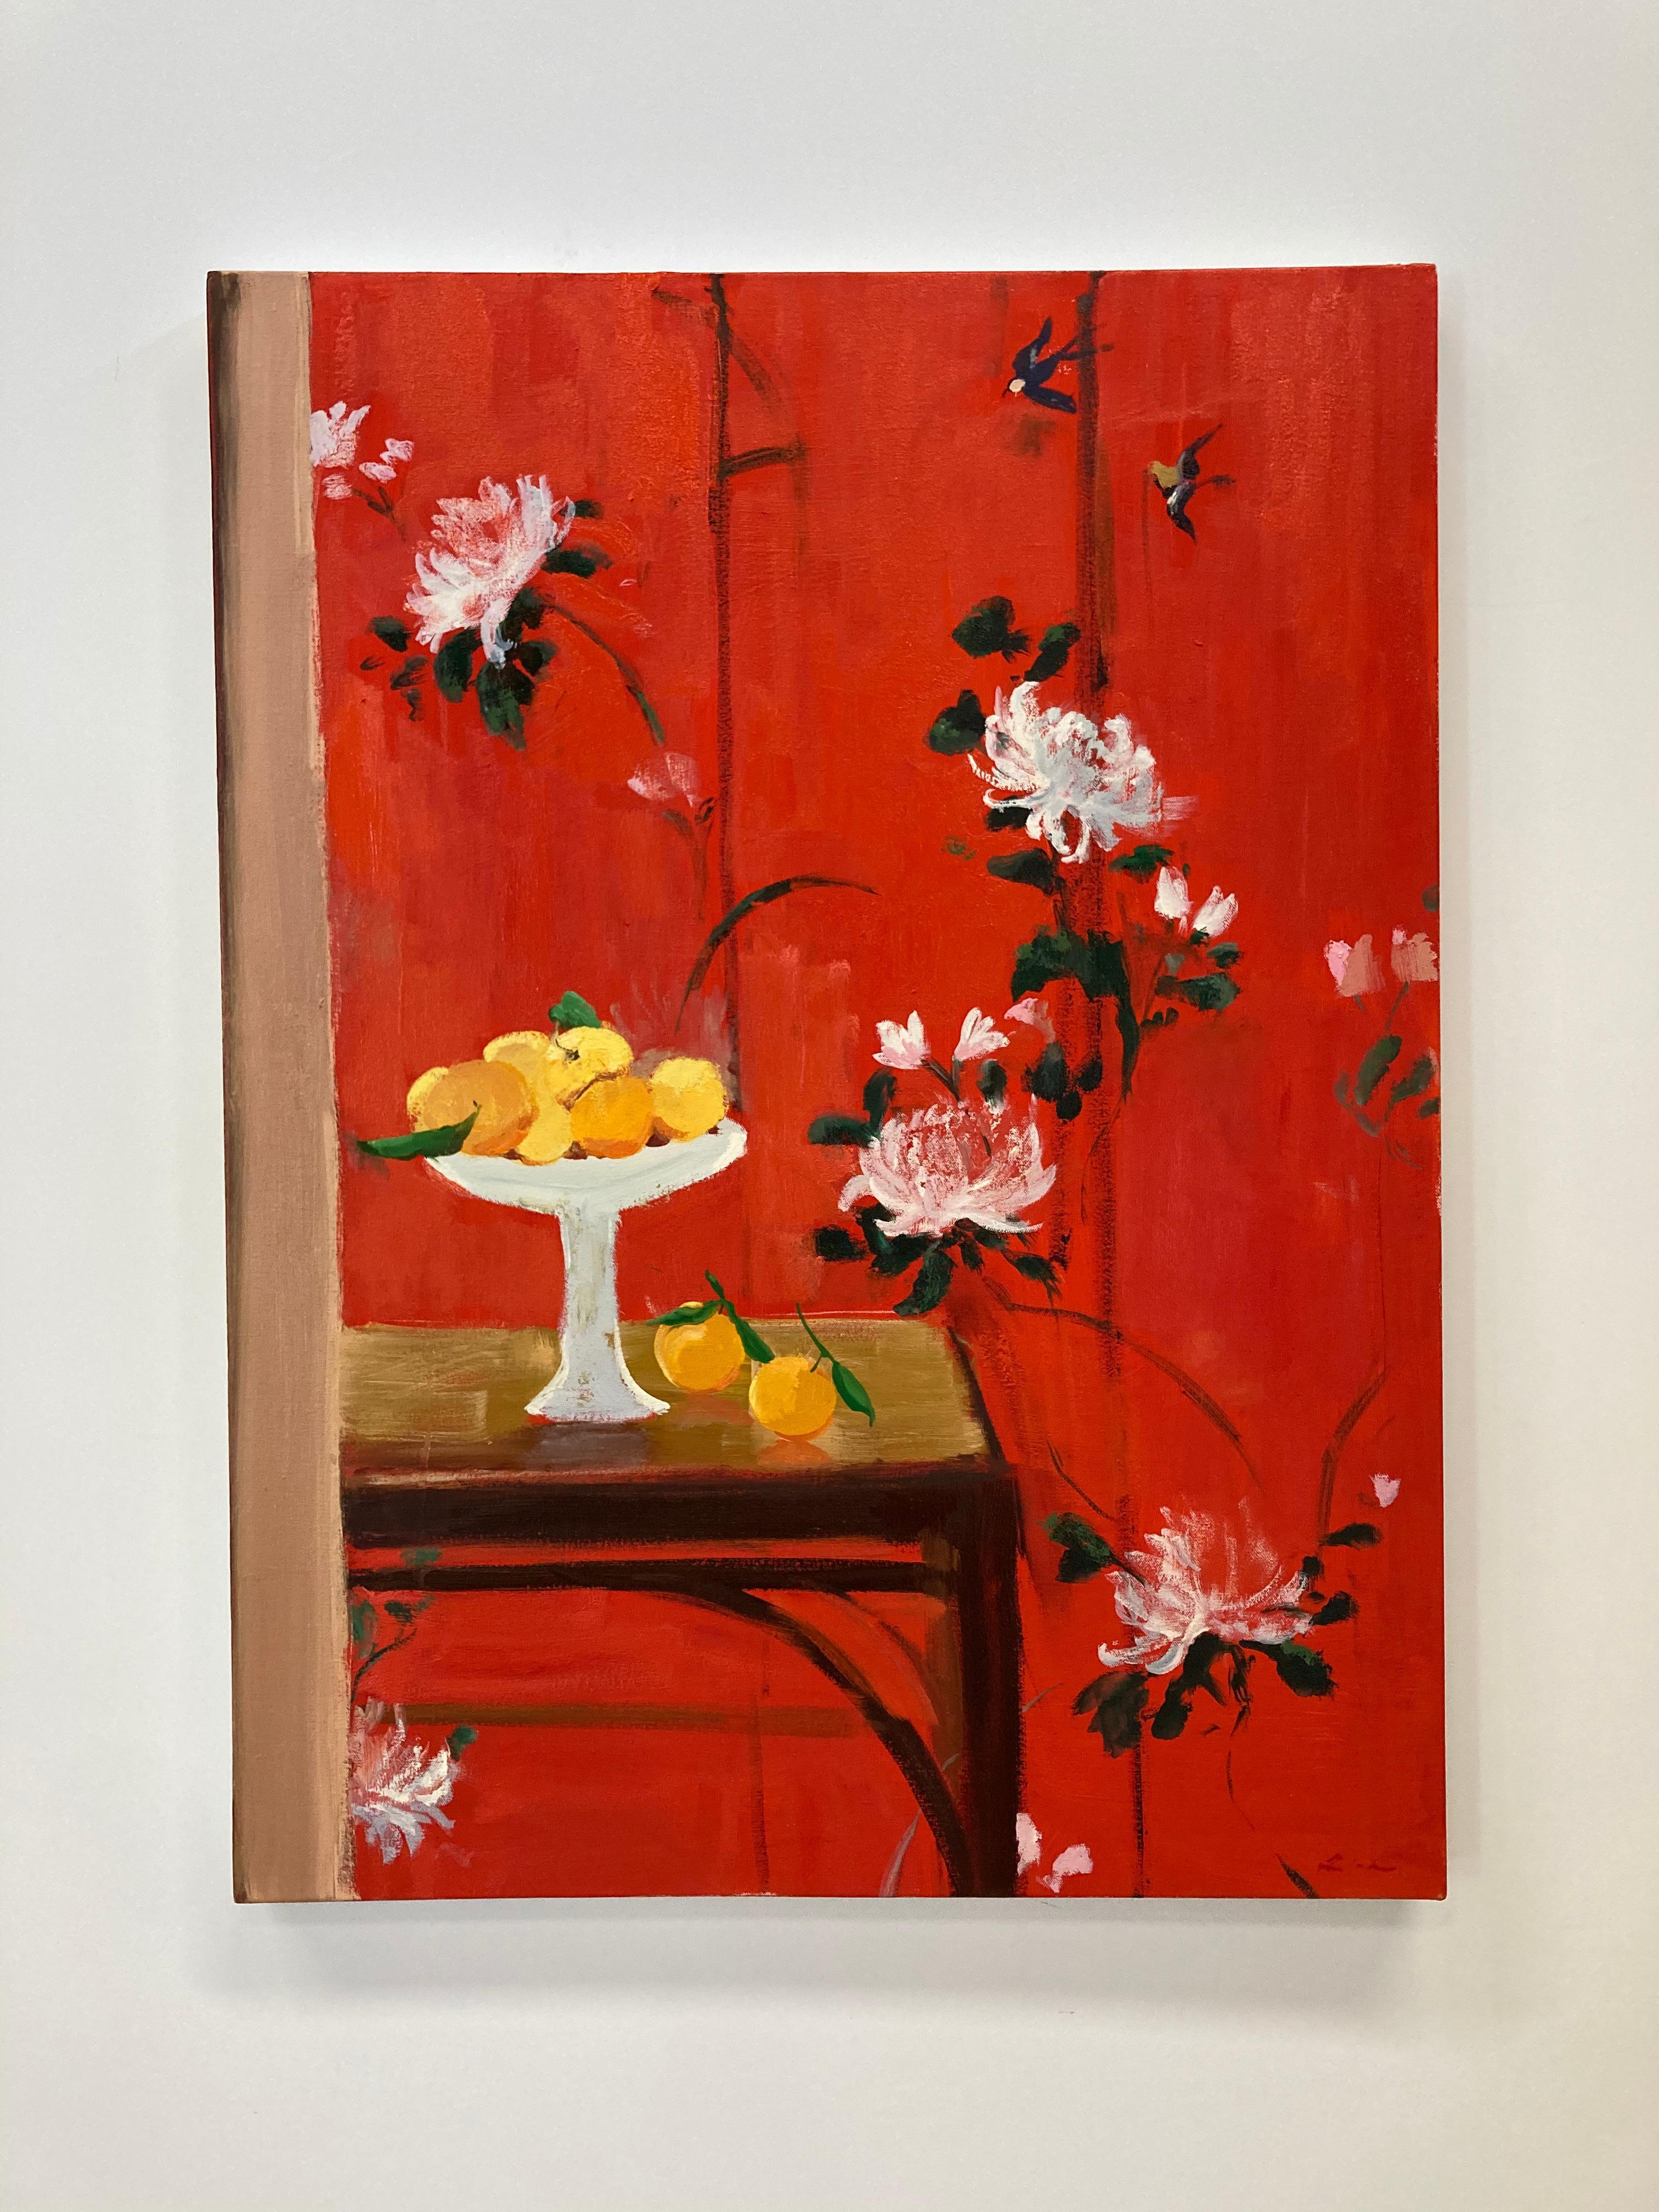 Orange Spice, Bright Red Vertical Botanical Still Life, Fruits, White Flowers - Painting by Melanie Parke